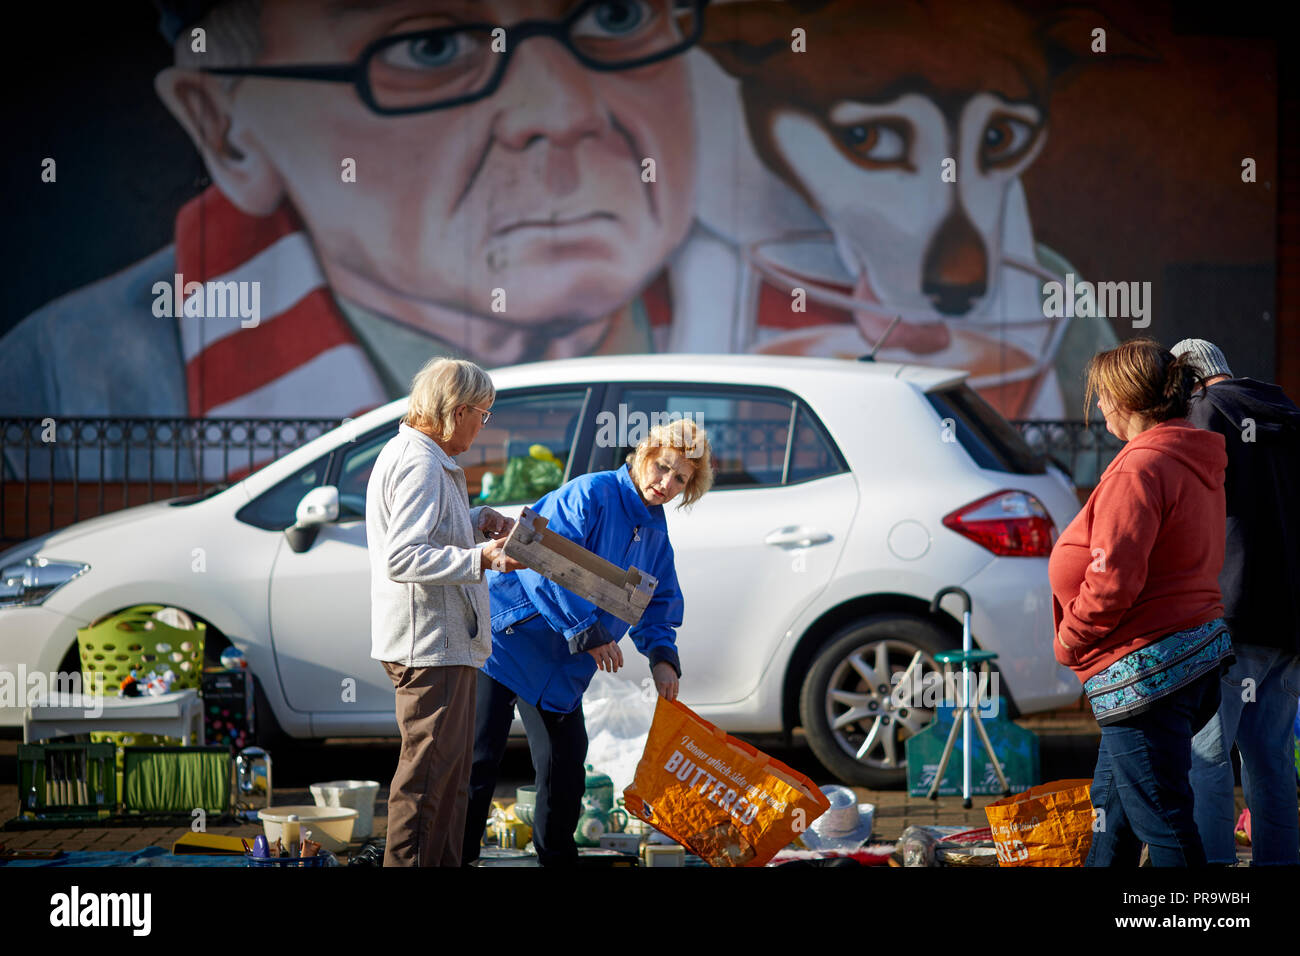 Car boot sale at the market hall with mural behind Stoke-on-Trent, Staffordshire Stock Photo